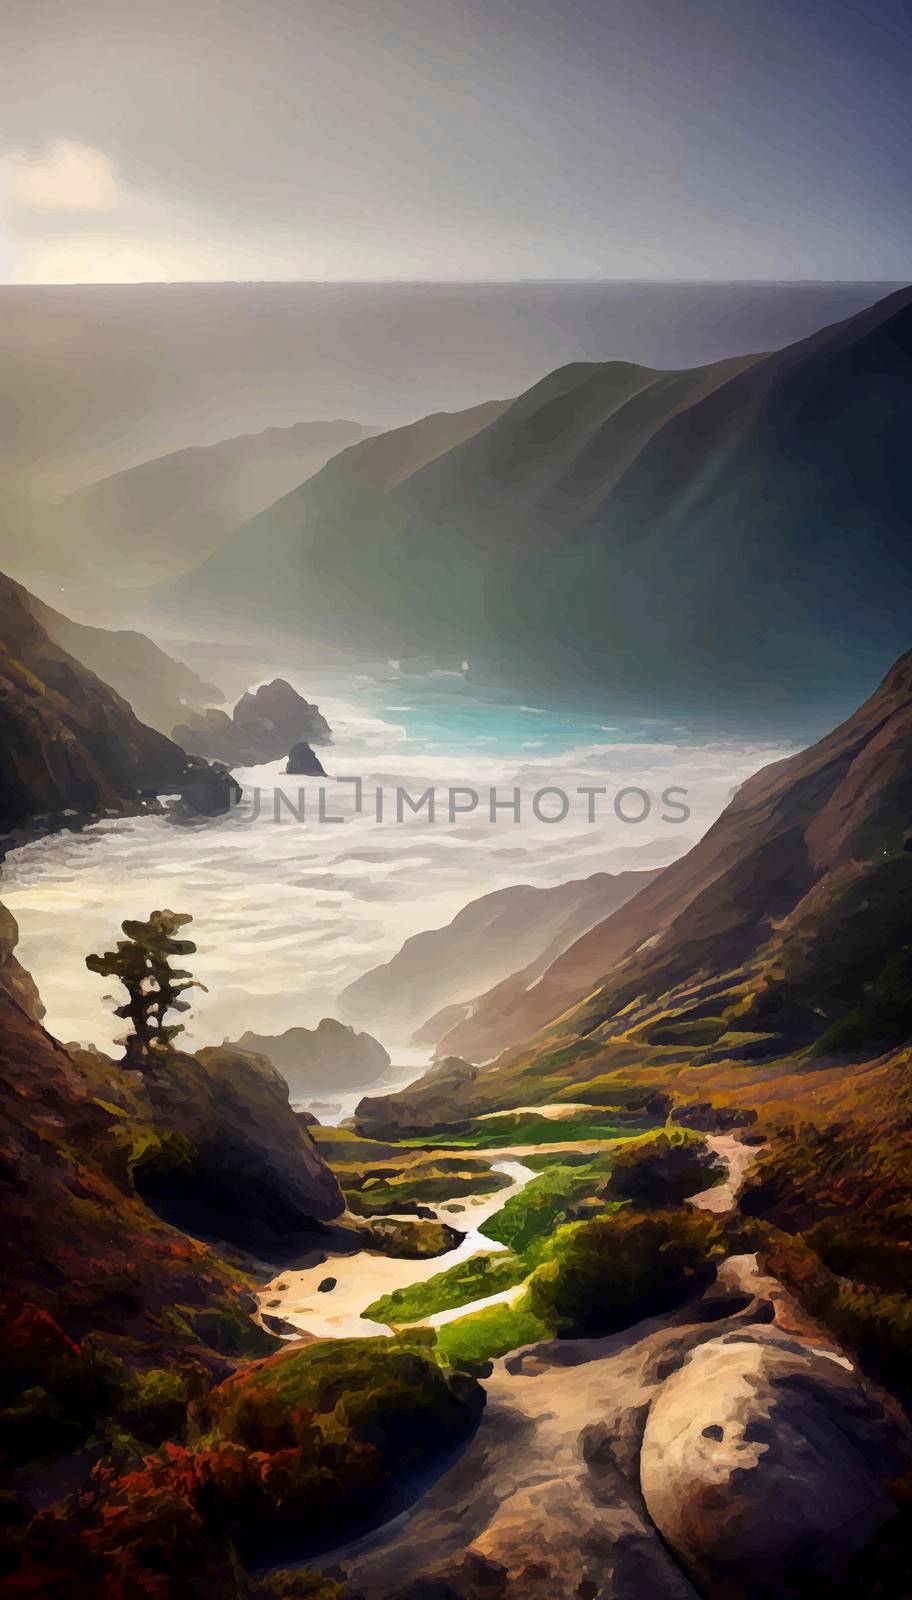 Illustration of peaceful landscape with a natural setting, cinematic and beautiful landscape illustration